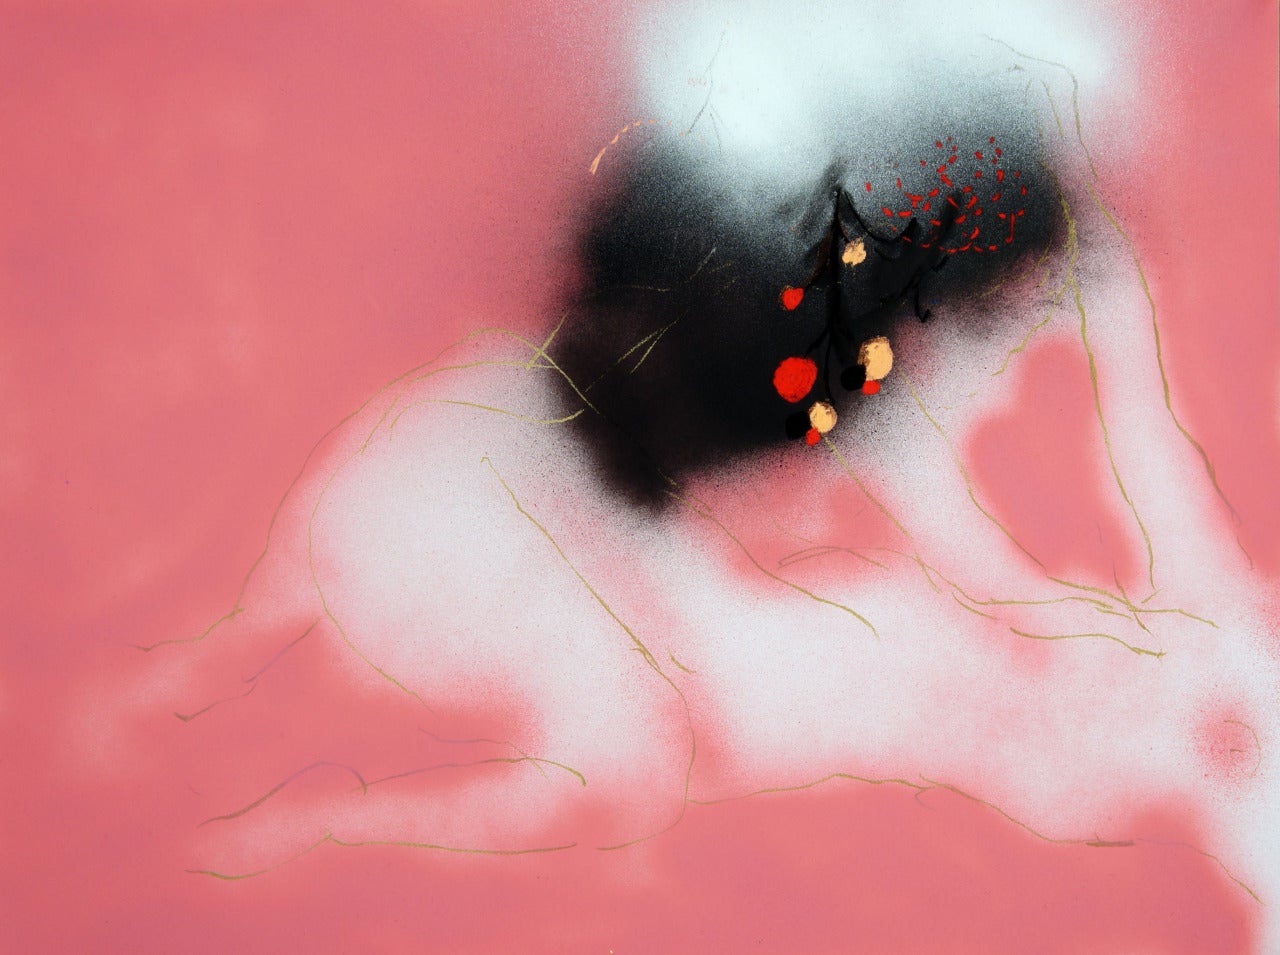 This pastel and spray paint on paper, depicts two white abstract figures.  One person lays on her back, and the other figure is on top.  Their arms are stretched out towards each other, but the purpose is unclear.   The two figures are loosely